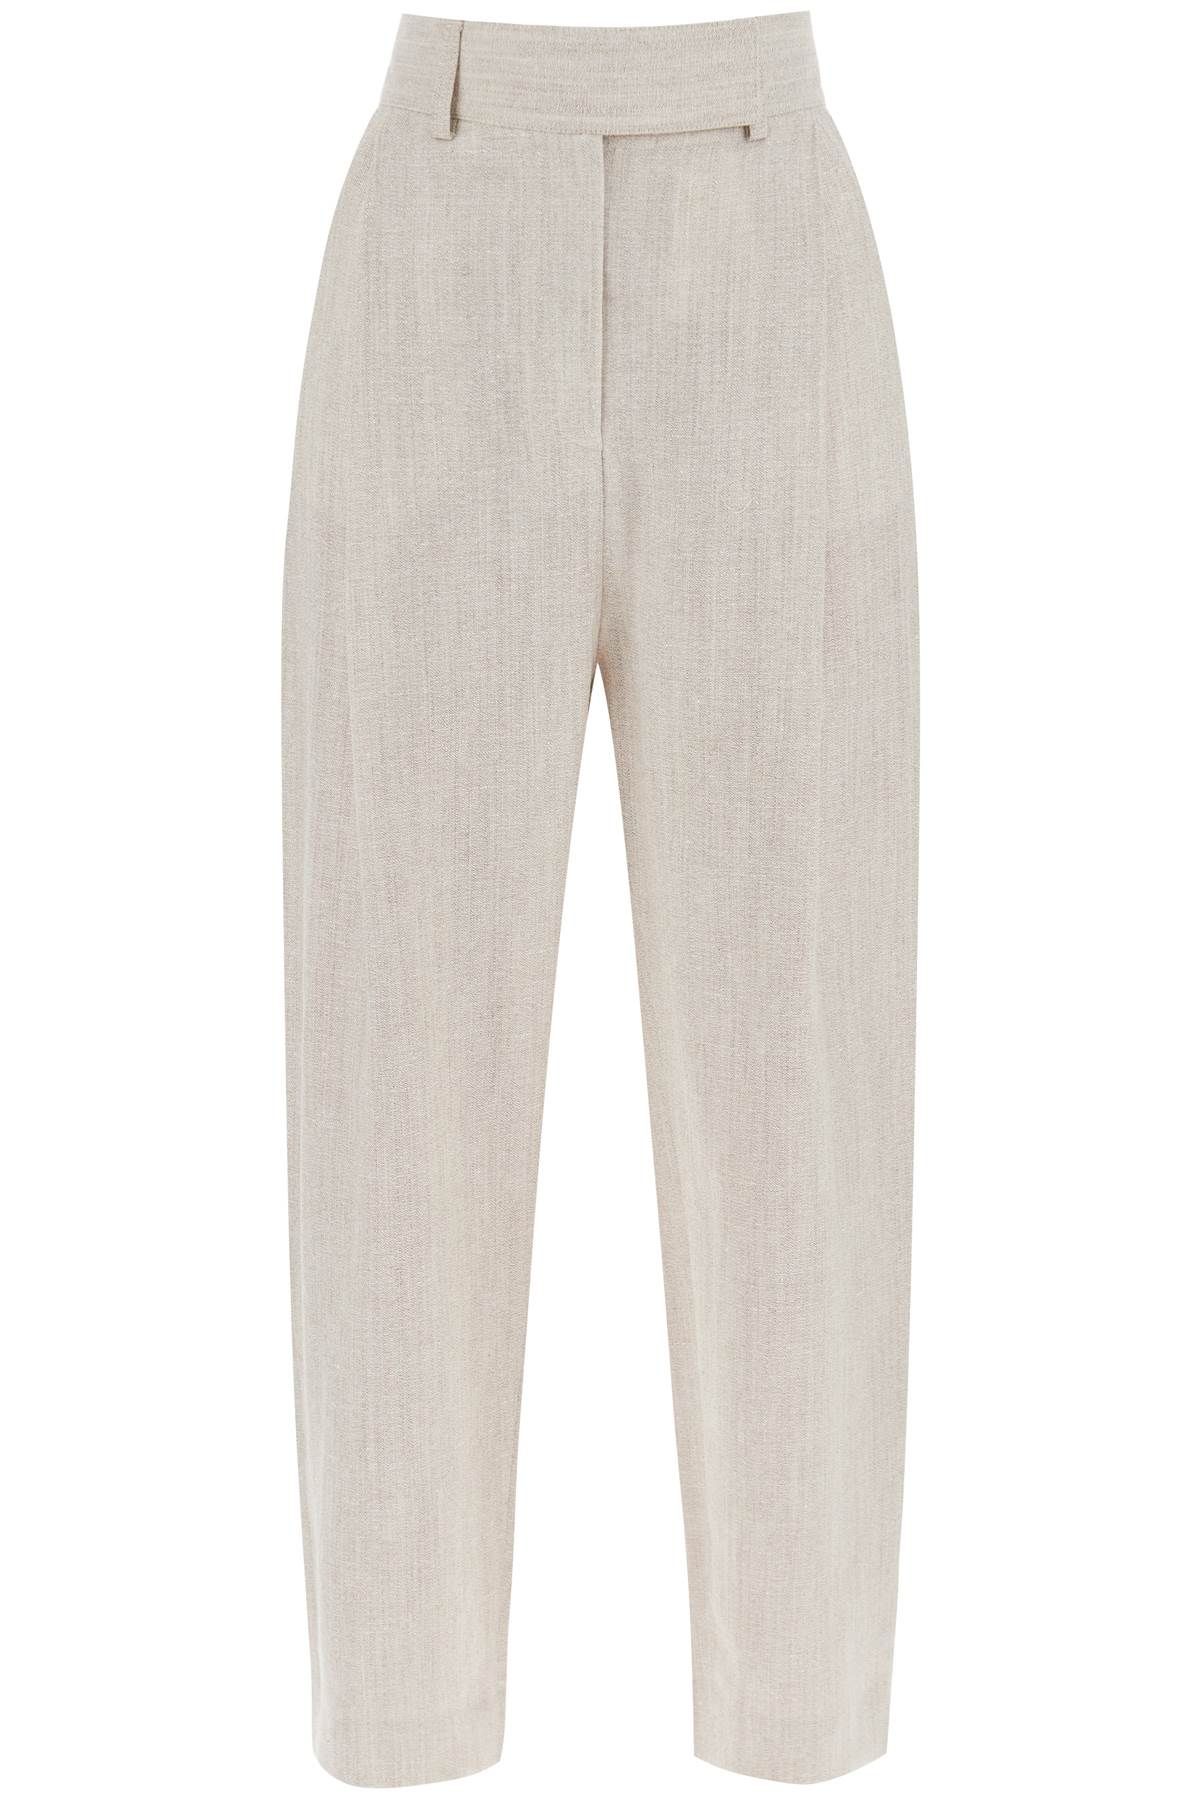 Shop Totême Tapered Pants With Mélange Finish In Beige